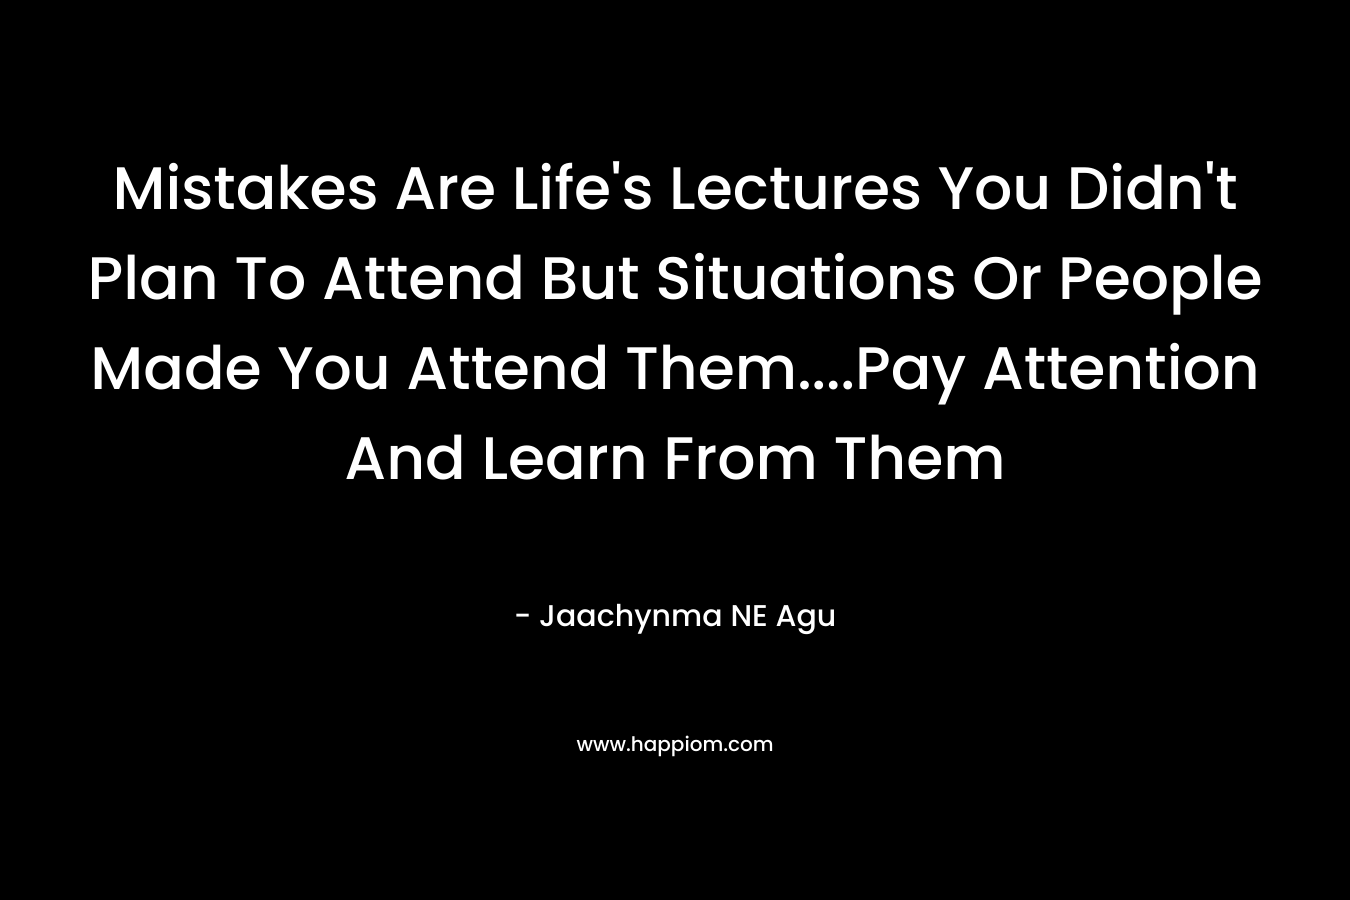 Mistakes Are Life’s Lectures You Didn’t Plan To Attend But Situations Or People Made You Attend Them….Pay Attention And Learn From Them – Jaachynma NE Agu